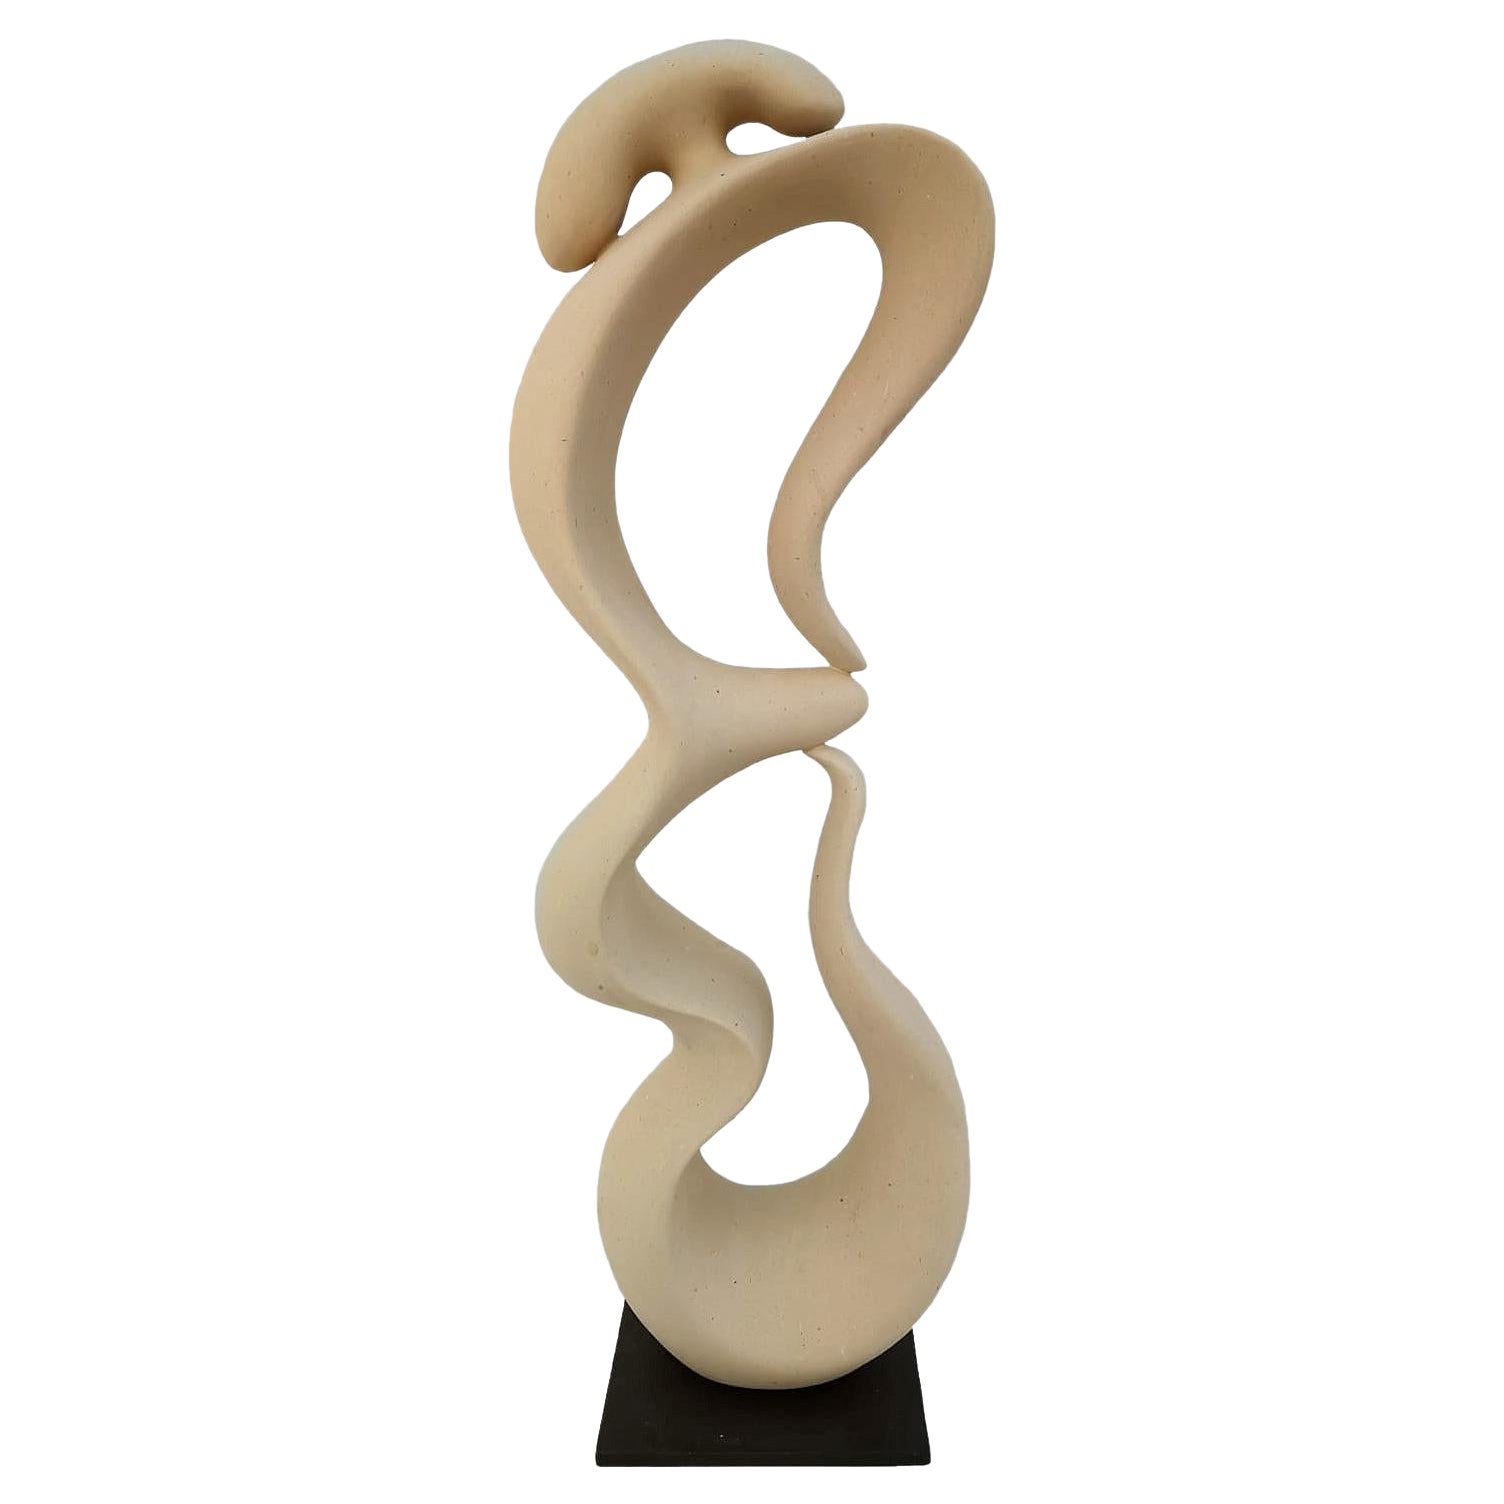 21st Century Abstract Sculpture Blandament 80 Cm Height by Renzo Buttazzo